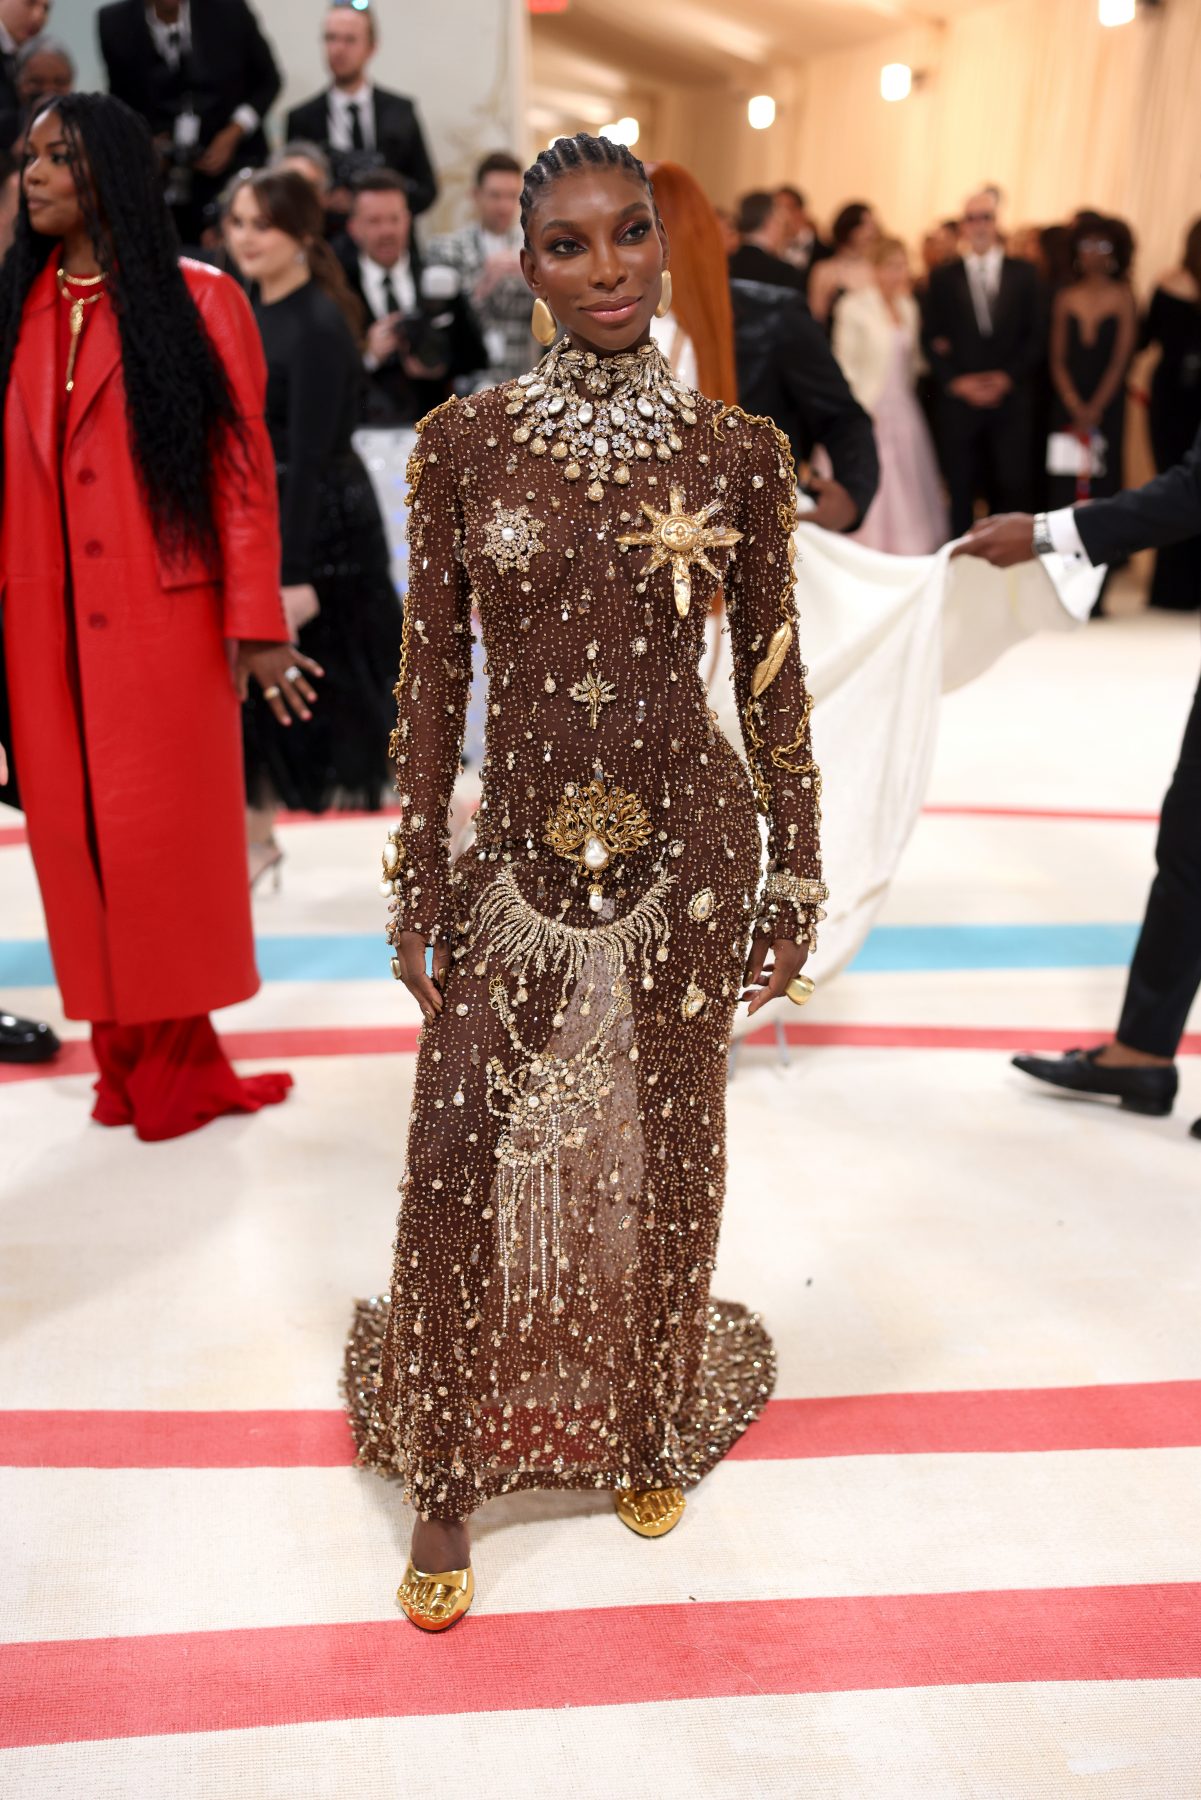 Here Are All The Best Dressed Stars At The 2023 Met Gala